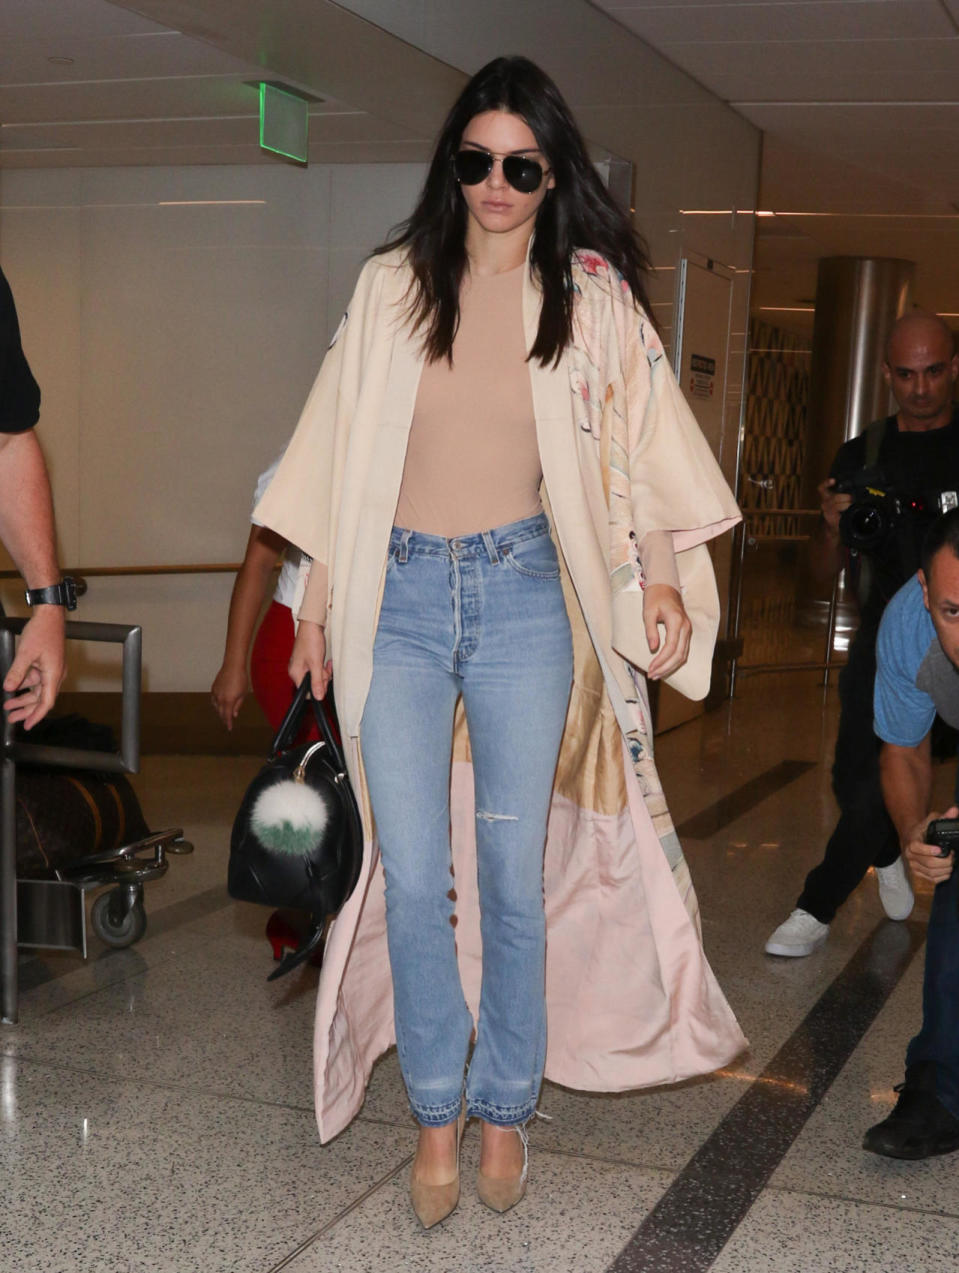 Kendall Jenner wears beige bodysuit, jeans, and kimono-style robe at LAX on Oct. 17, 2015 in Los Angeles.